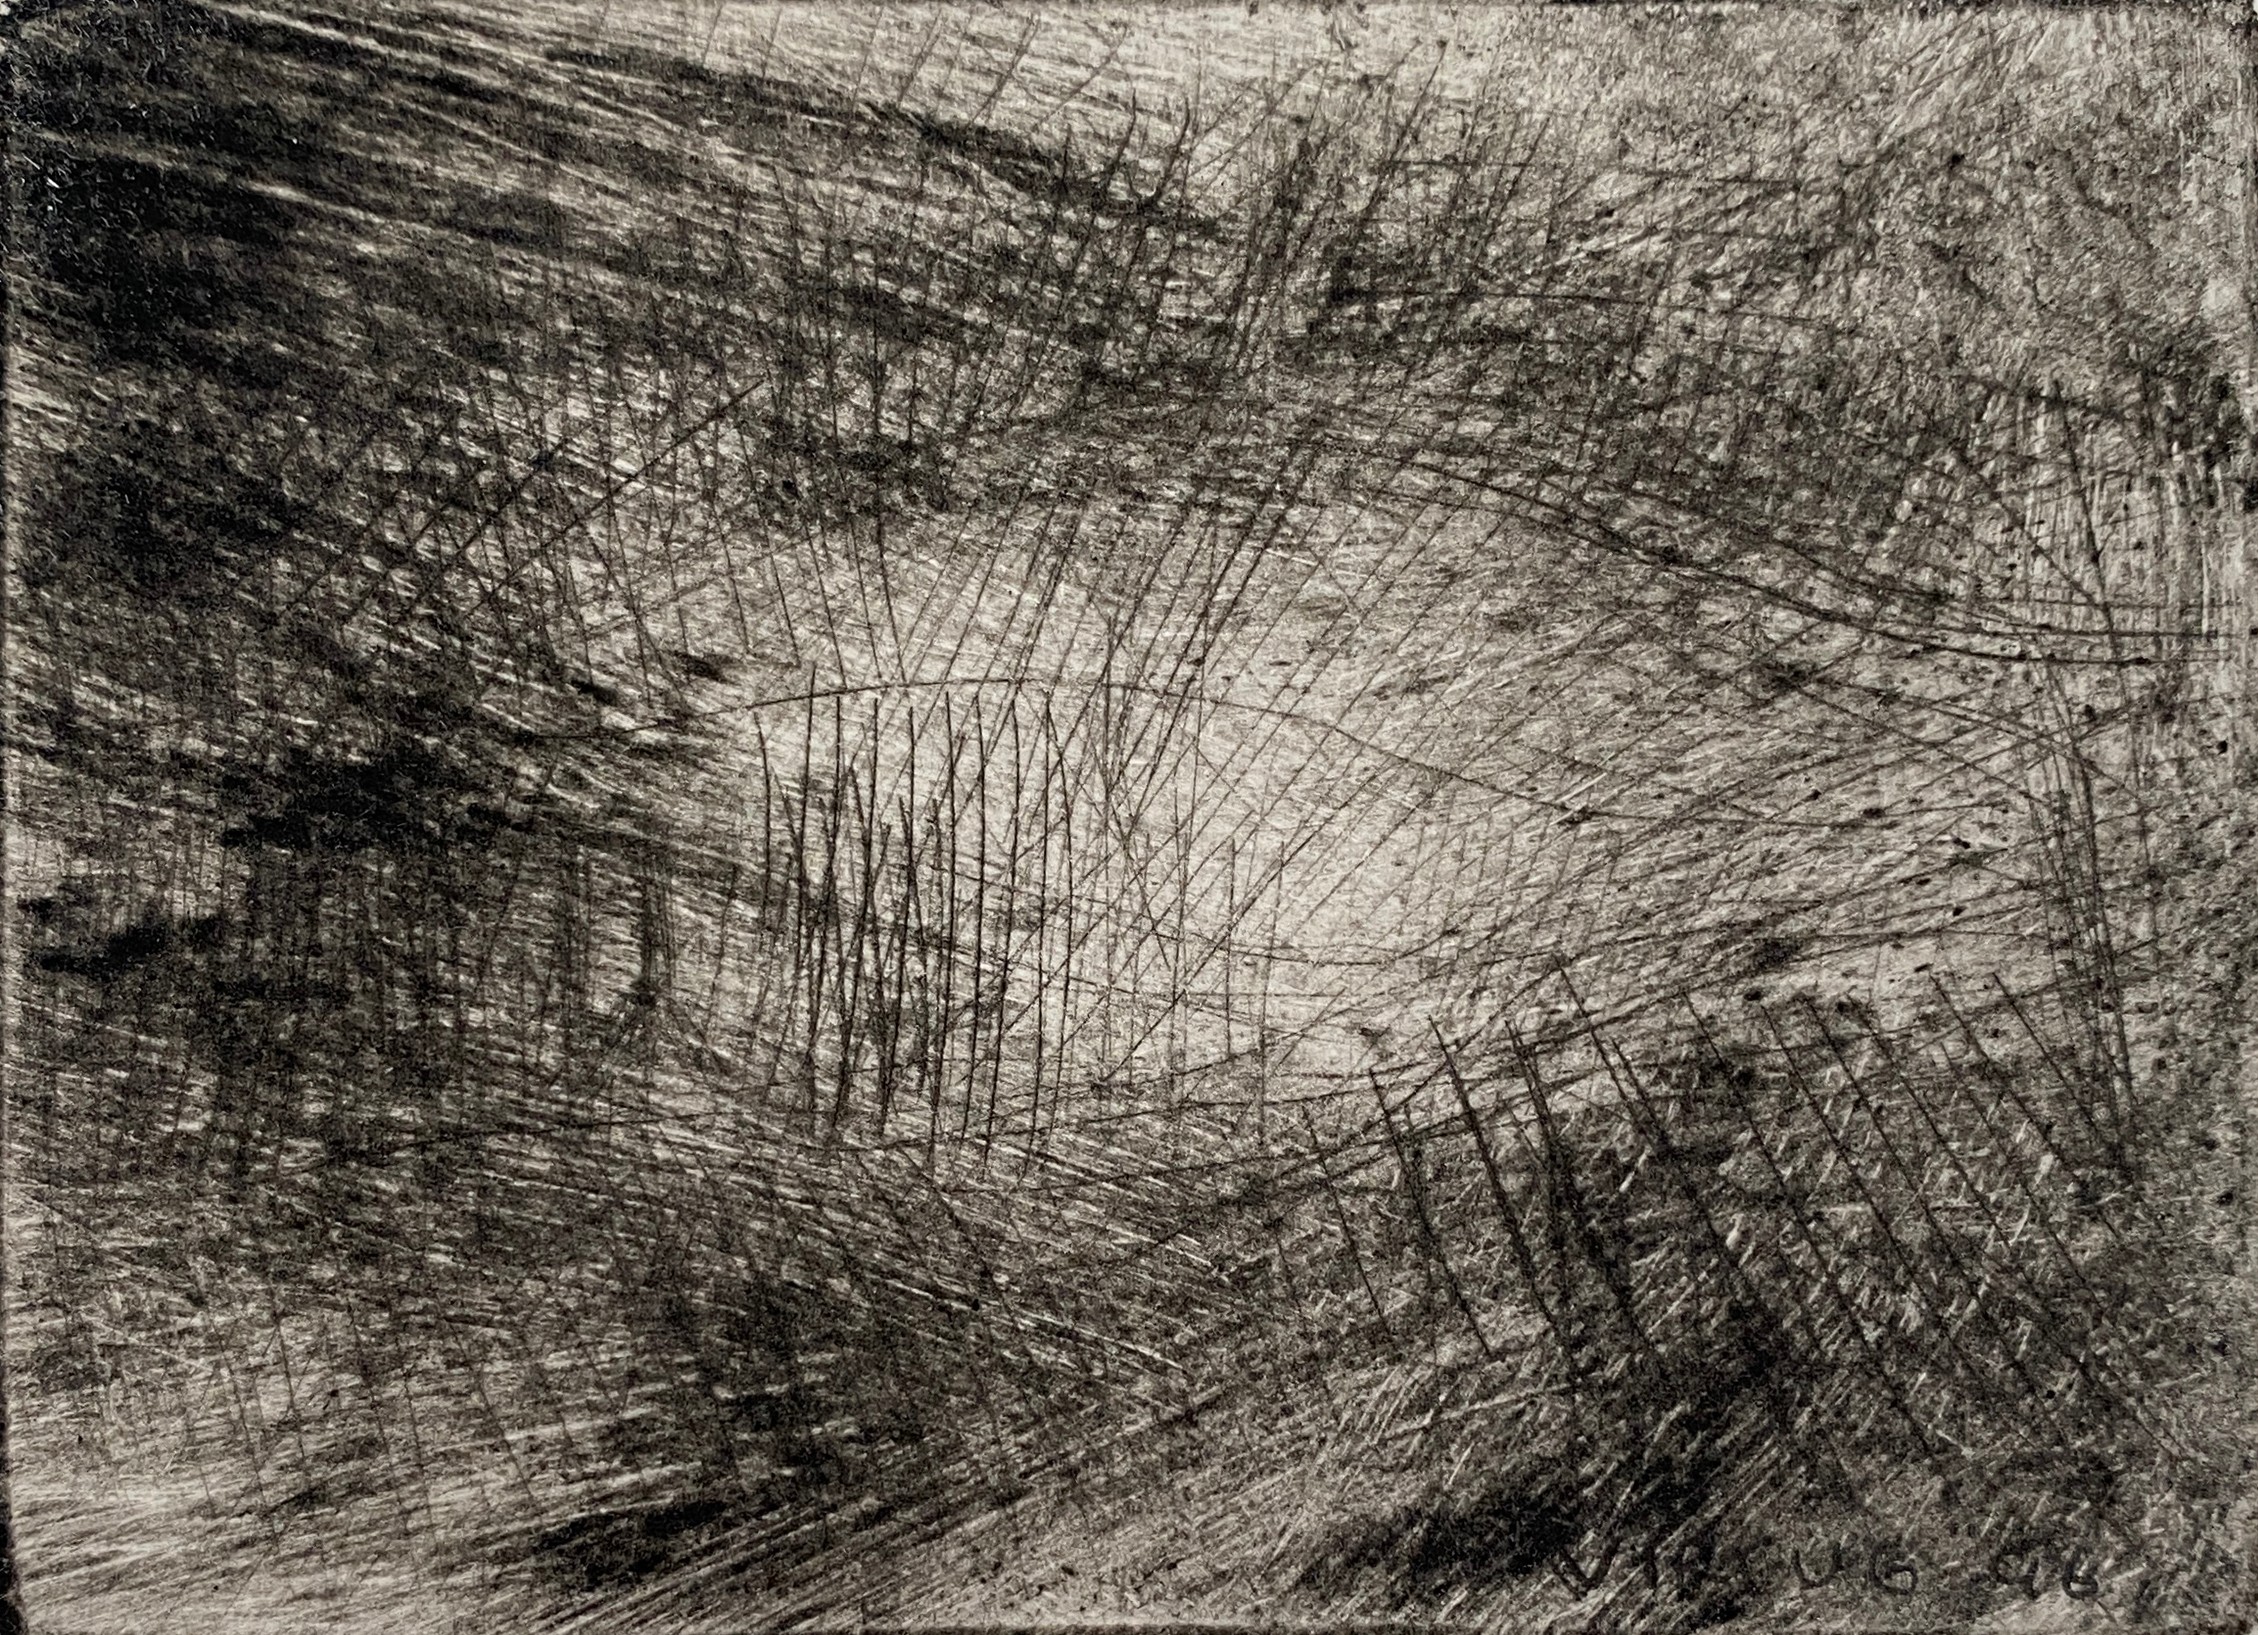 John Virtue (b.1947), Landscape etching, no. 22 var. 2, signed and dated '96 within the plate, the